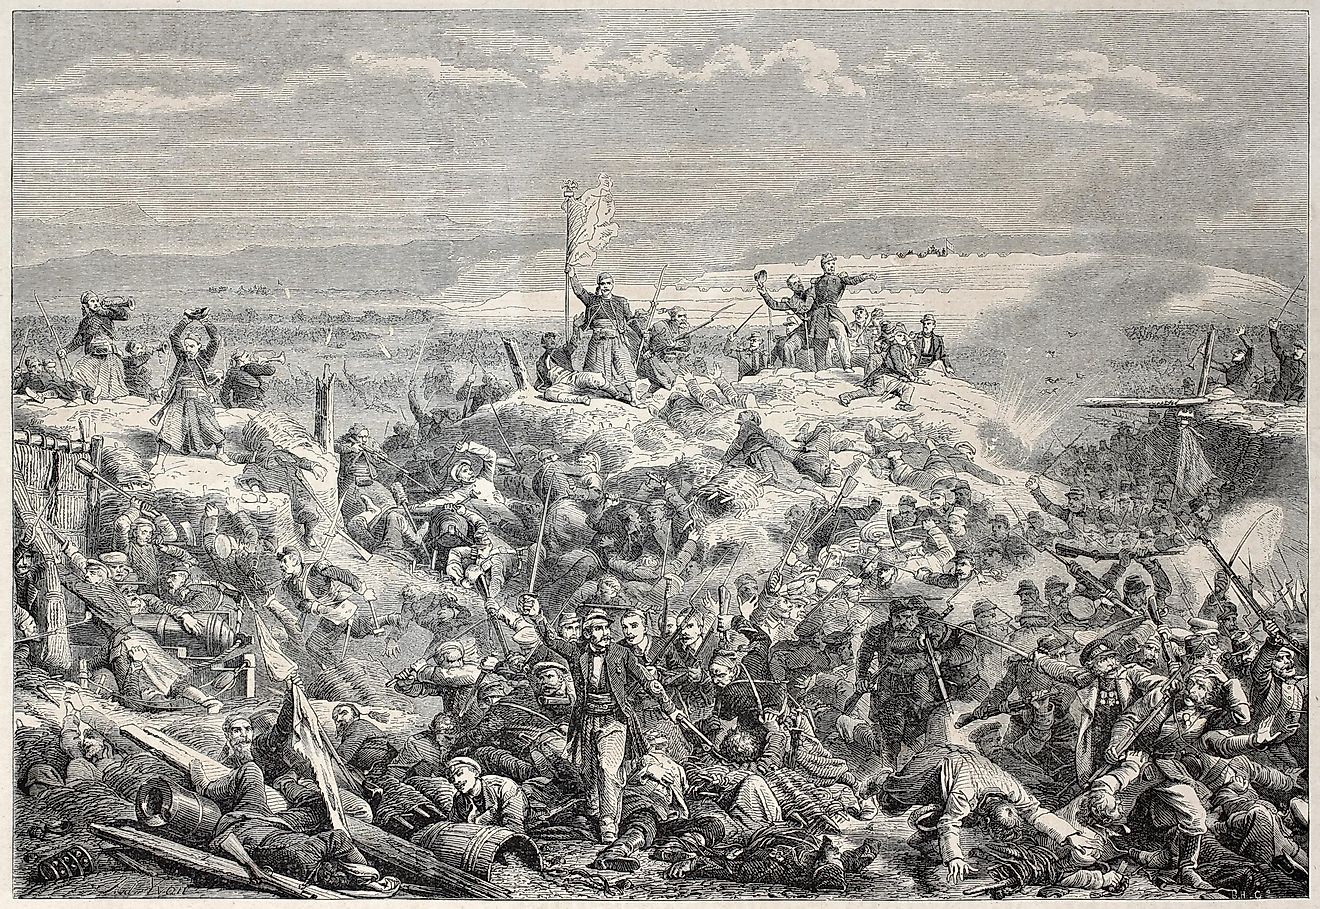 Old illustration of the taking of Malakoff by French army during Crimean war